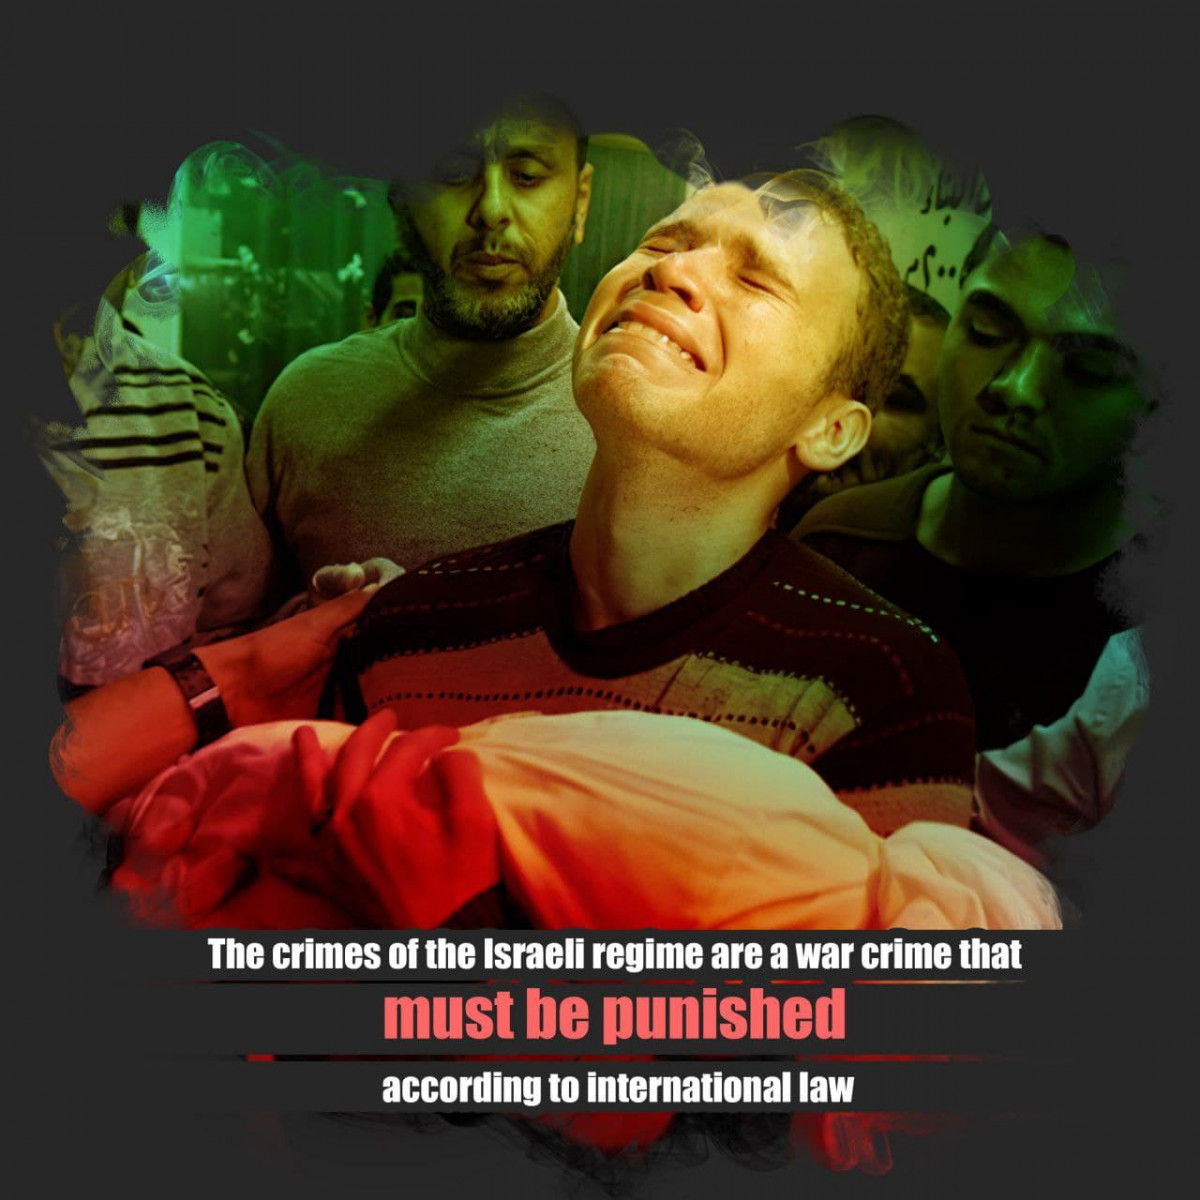 The crimes of the Israeli regime are a war crime that must be punished according to international law